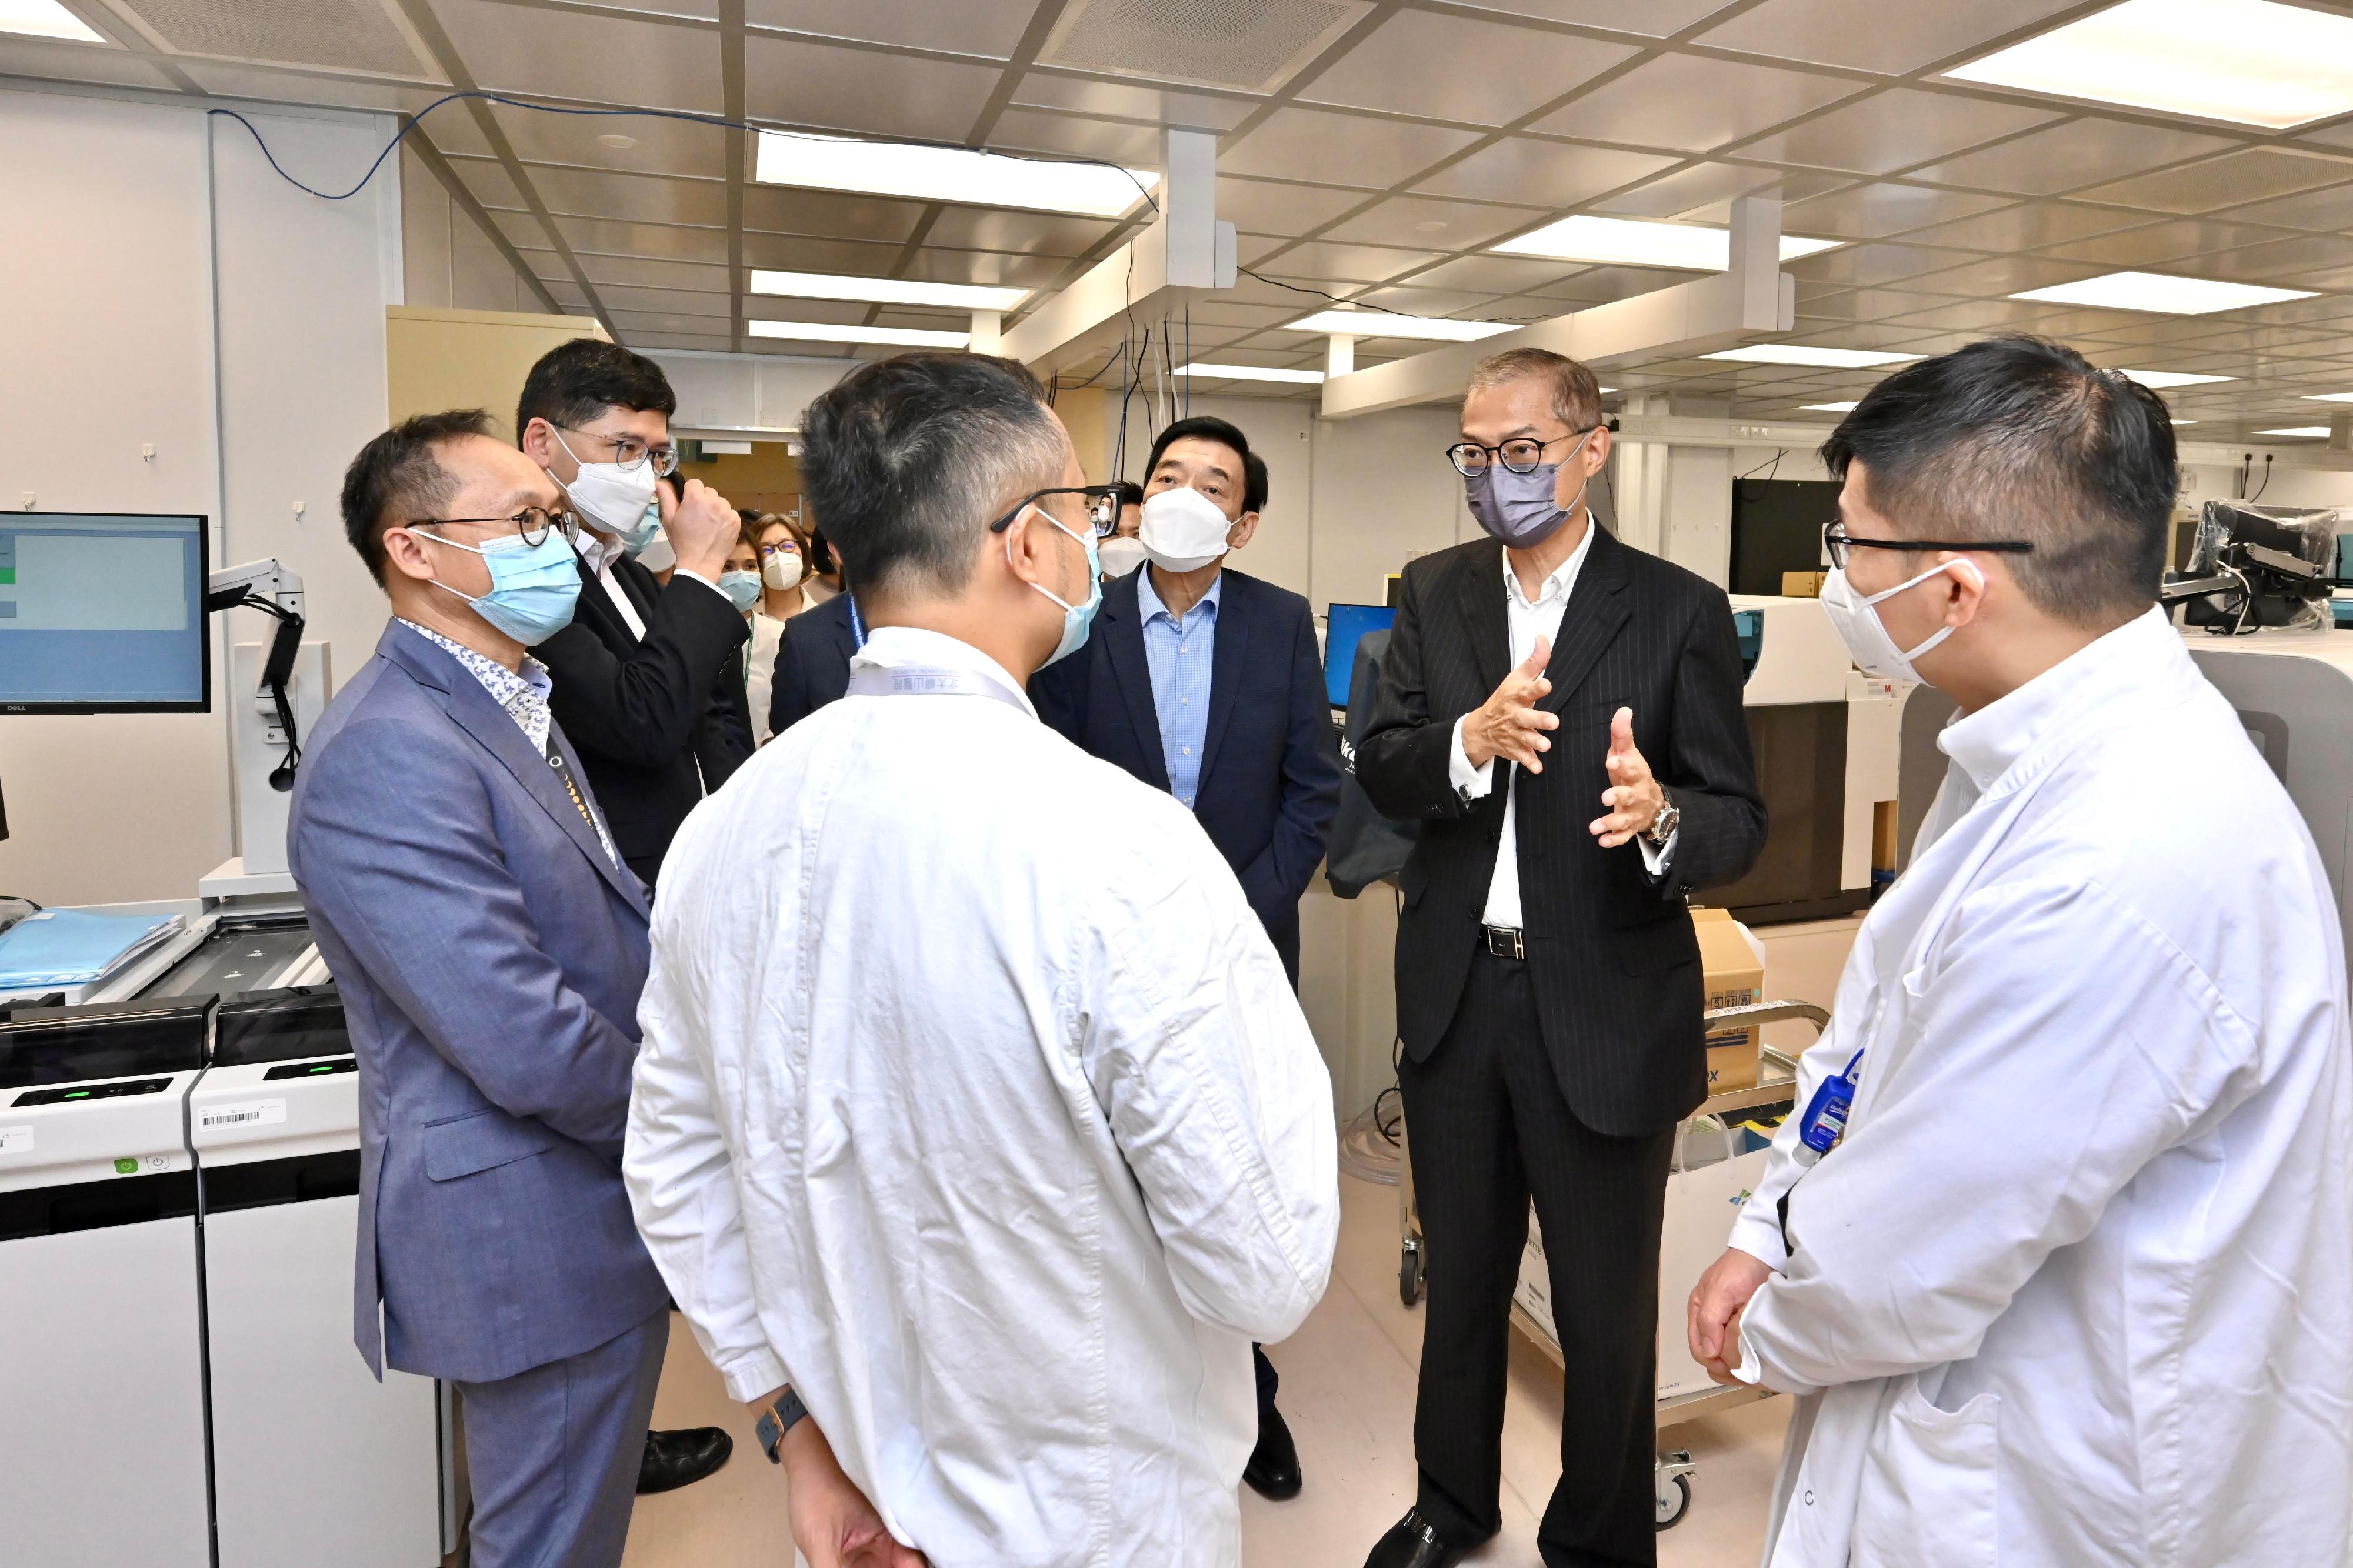 The Secretary for Health, Professor Lo Chung-mau (second right), inspected the North Lantau Hospital Hong Kong Infection Control Centre to have a better grasp on the treatment and nursing care provided by the healthcare personnel for COVID-19 patients. Looking on are the Chairman of the Hospital Authority (HA), Mr Henry Fan (third right), and the Chief Executive of the HA, Dr Tony Ko (second left).